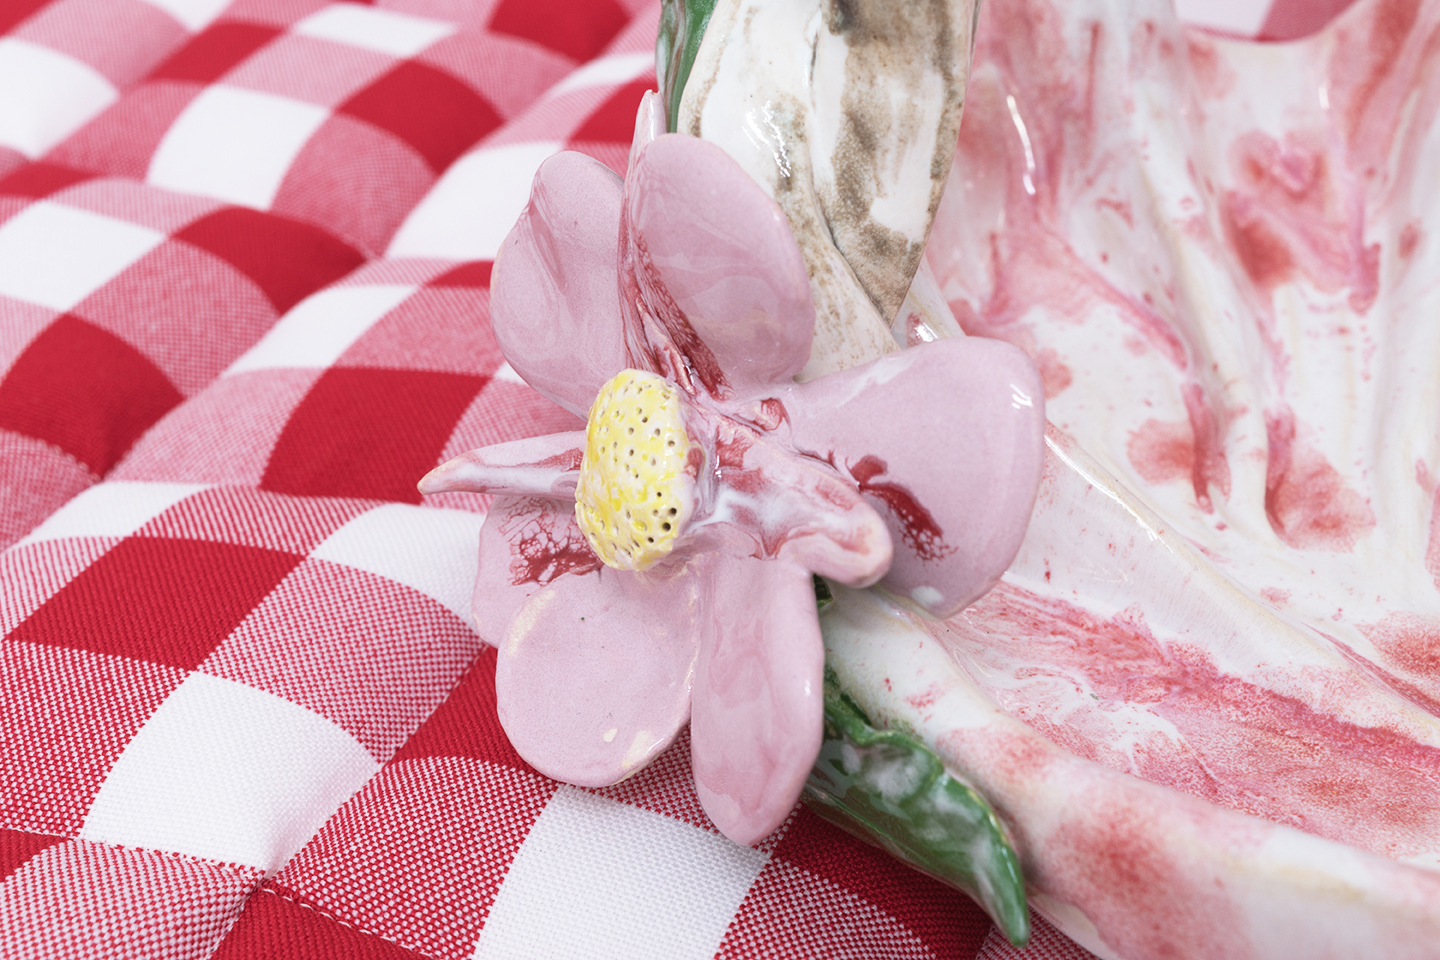 Naomi Gilon, Picnic with the wolf, 2019, glazed ceramics and wildflowers on padded tablecloth. 100x70x30 cm (detail)